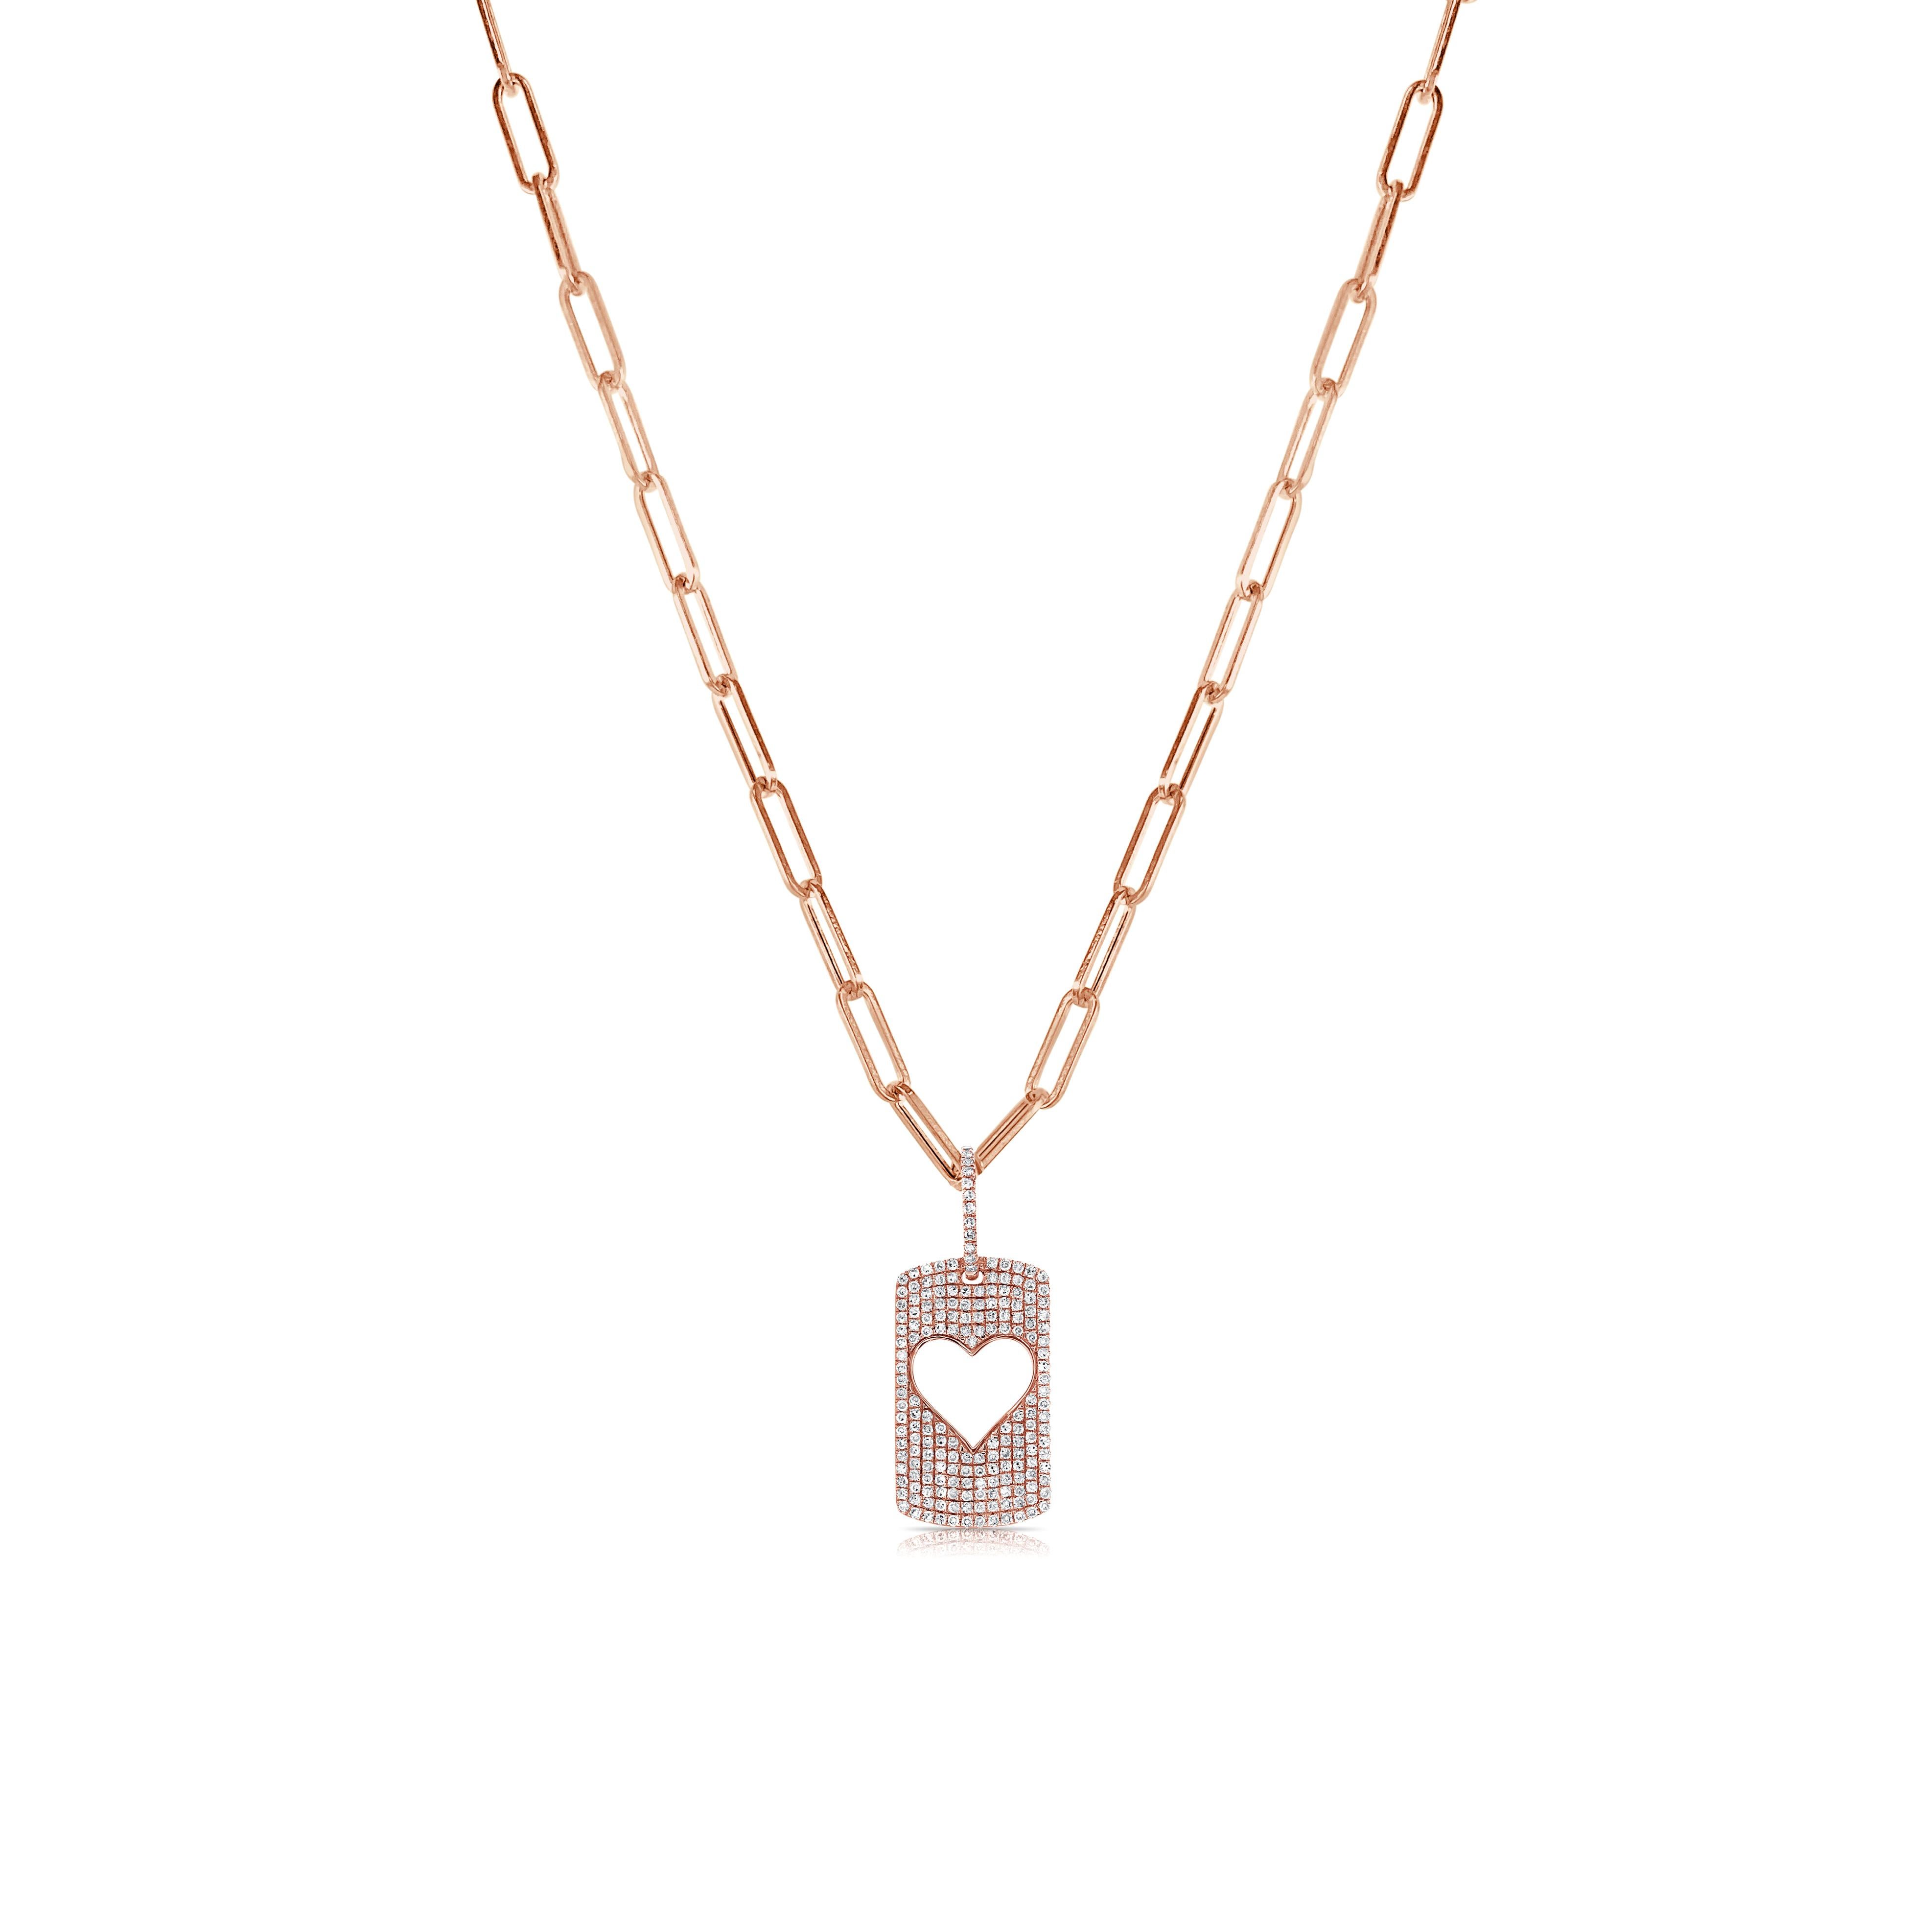 This stunning heart  charm necklace is beautifully crafted of 14k white gold and features 0.45 ct. of round-cut white sparkly diamonds. The pendant is hung from an 18-inch link chain that secures with a lobster clasp. 
14K Gold
0.45cts Natural White